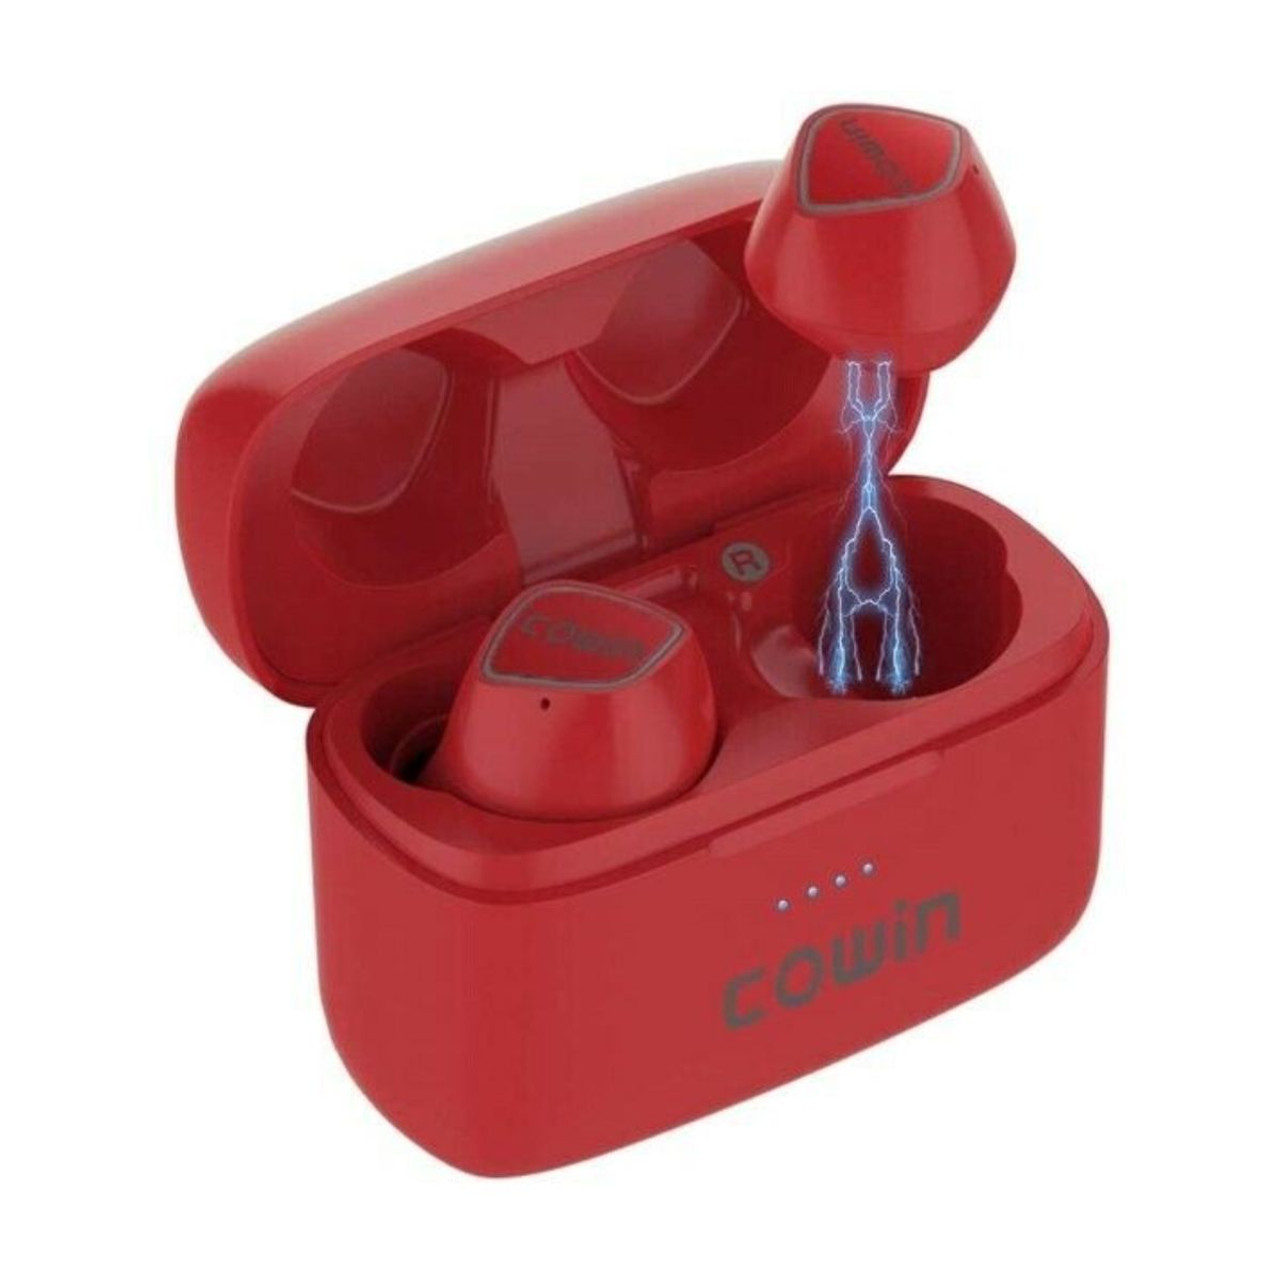 COWIN KY02 Wireless Earbuds with Microphone product image